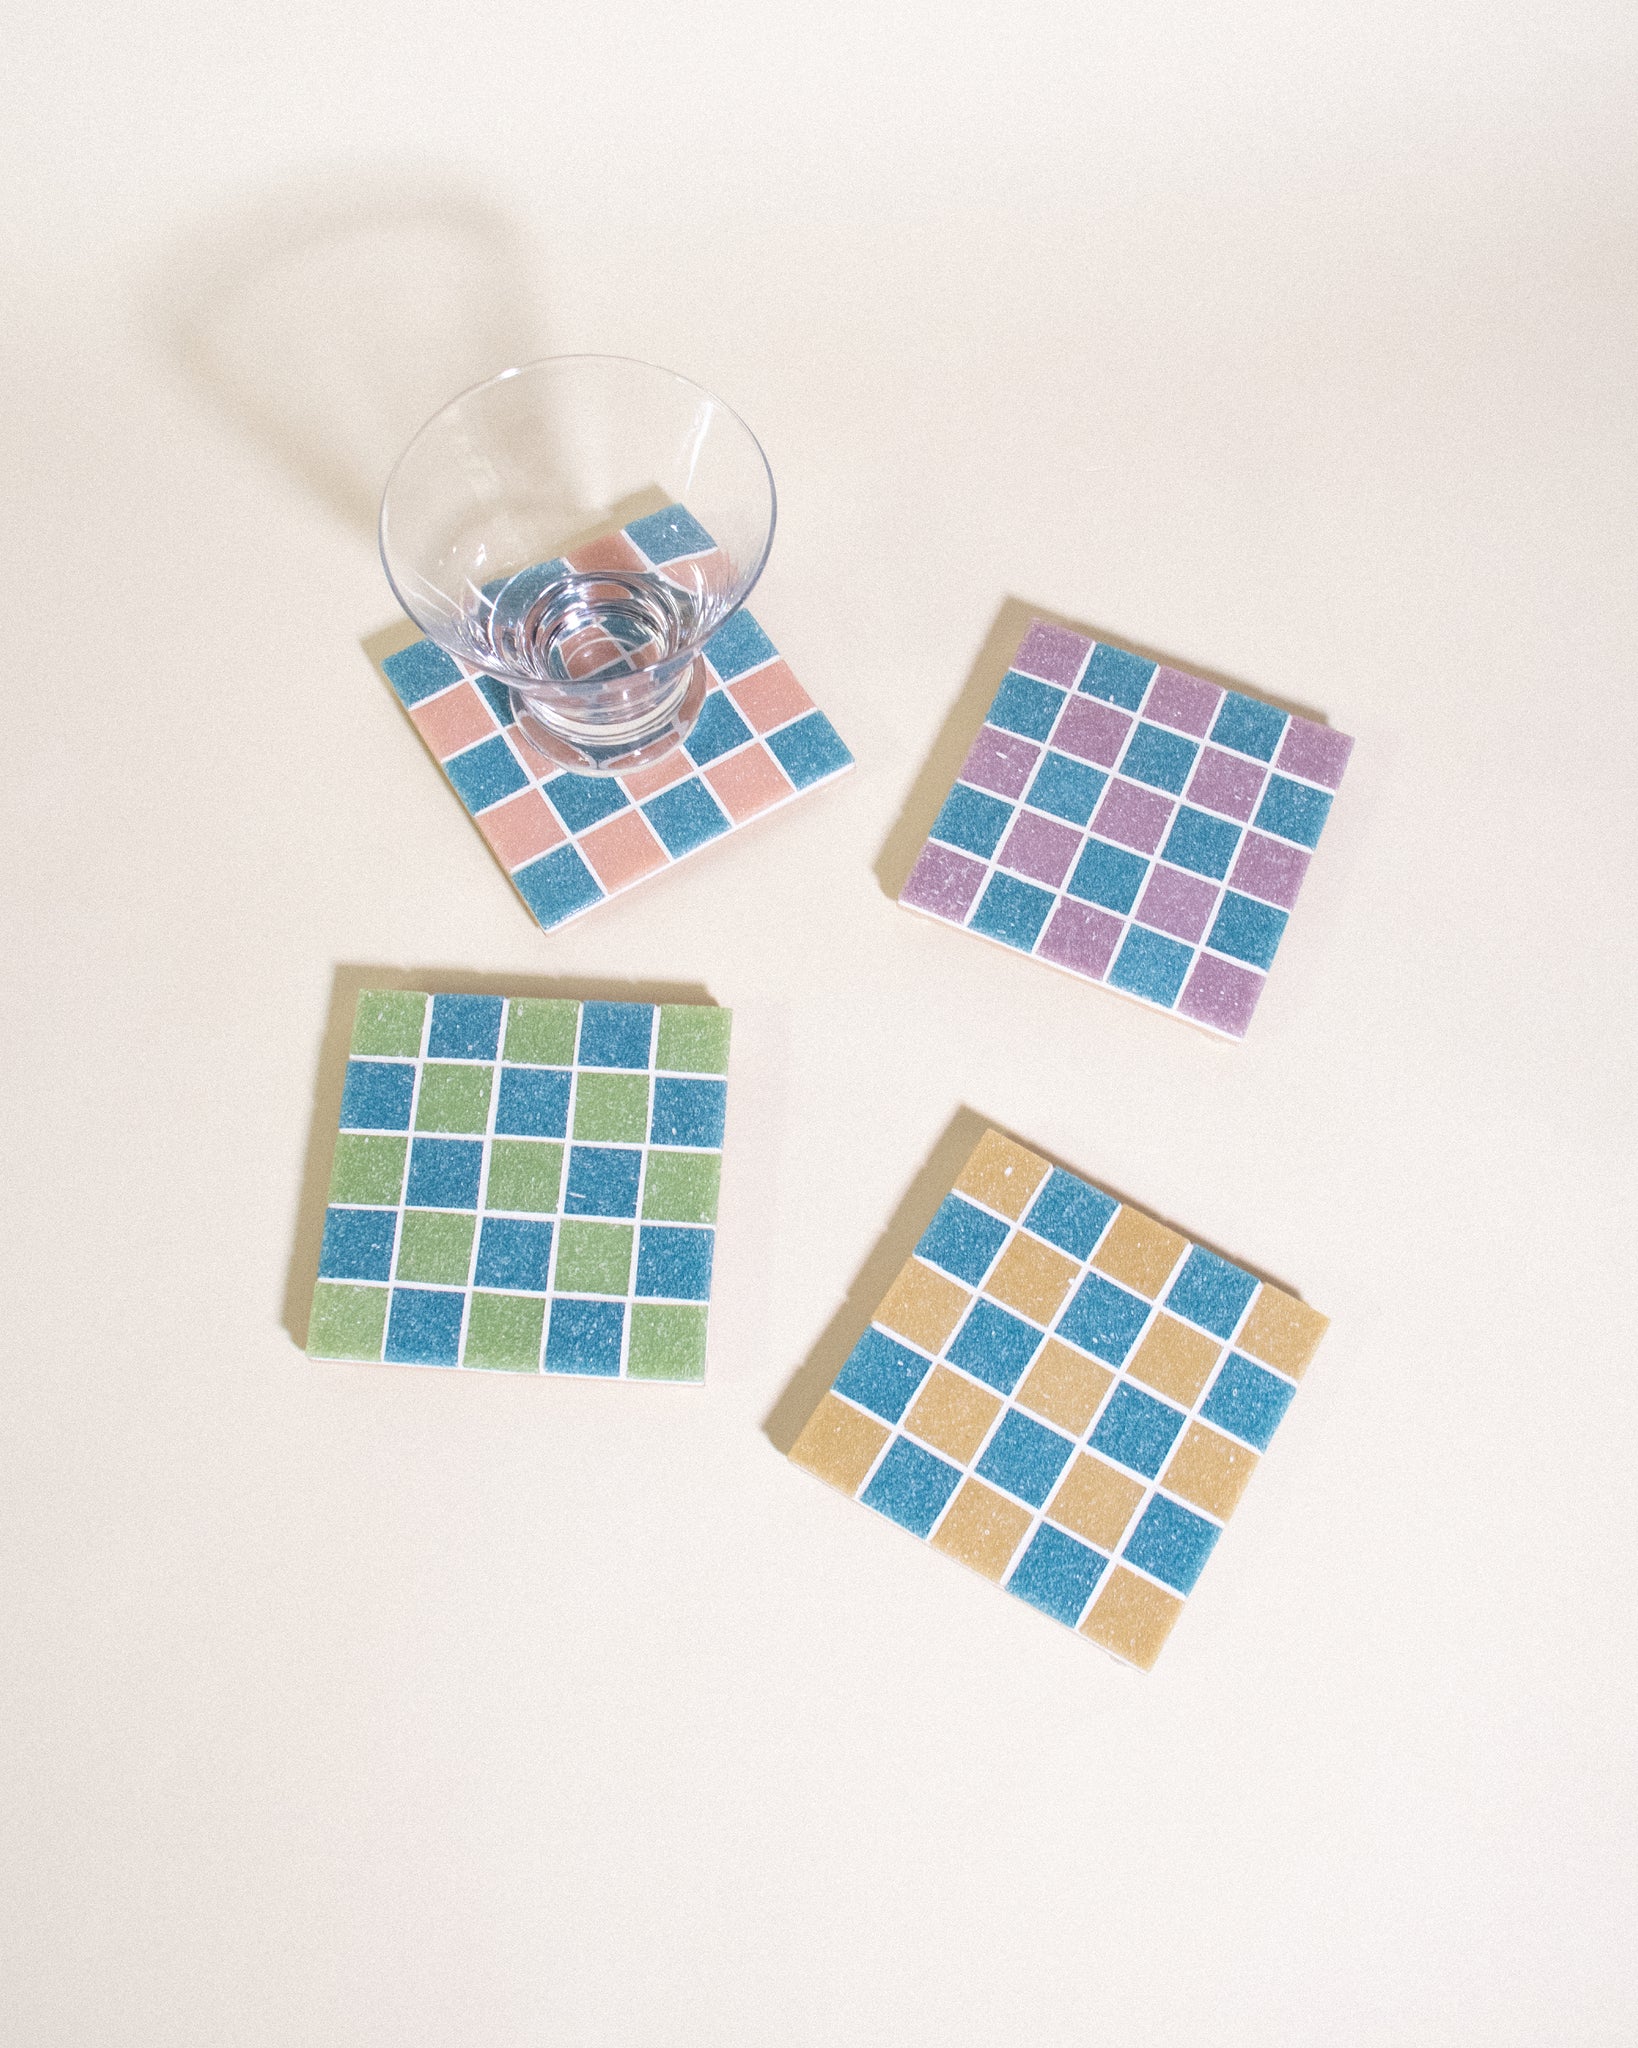 GLASS TILE COASTER - Sour Patch Candy - 15